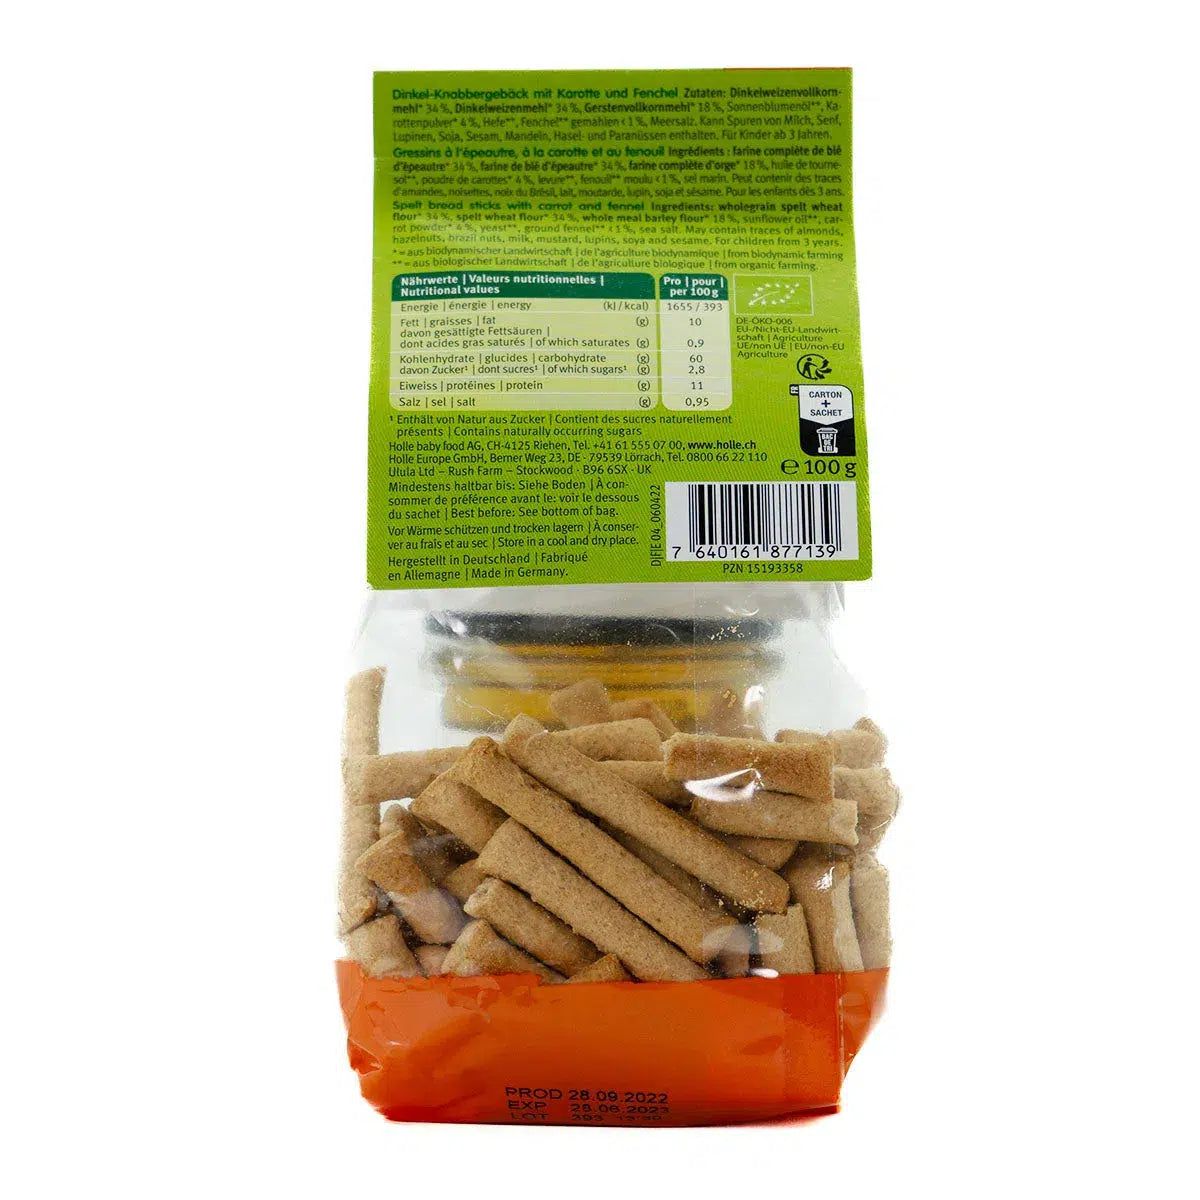 Holle Snack - Carrot-Fennel Sticks (3+ Years), 100g - 6 Packs